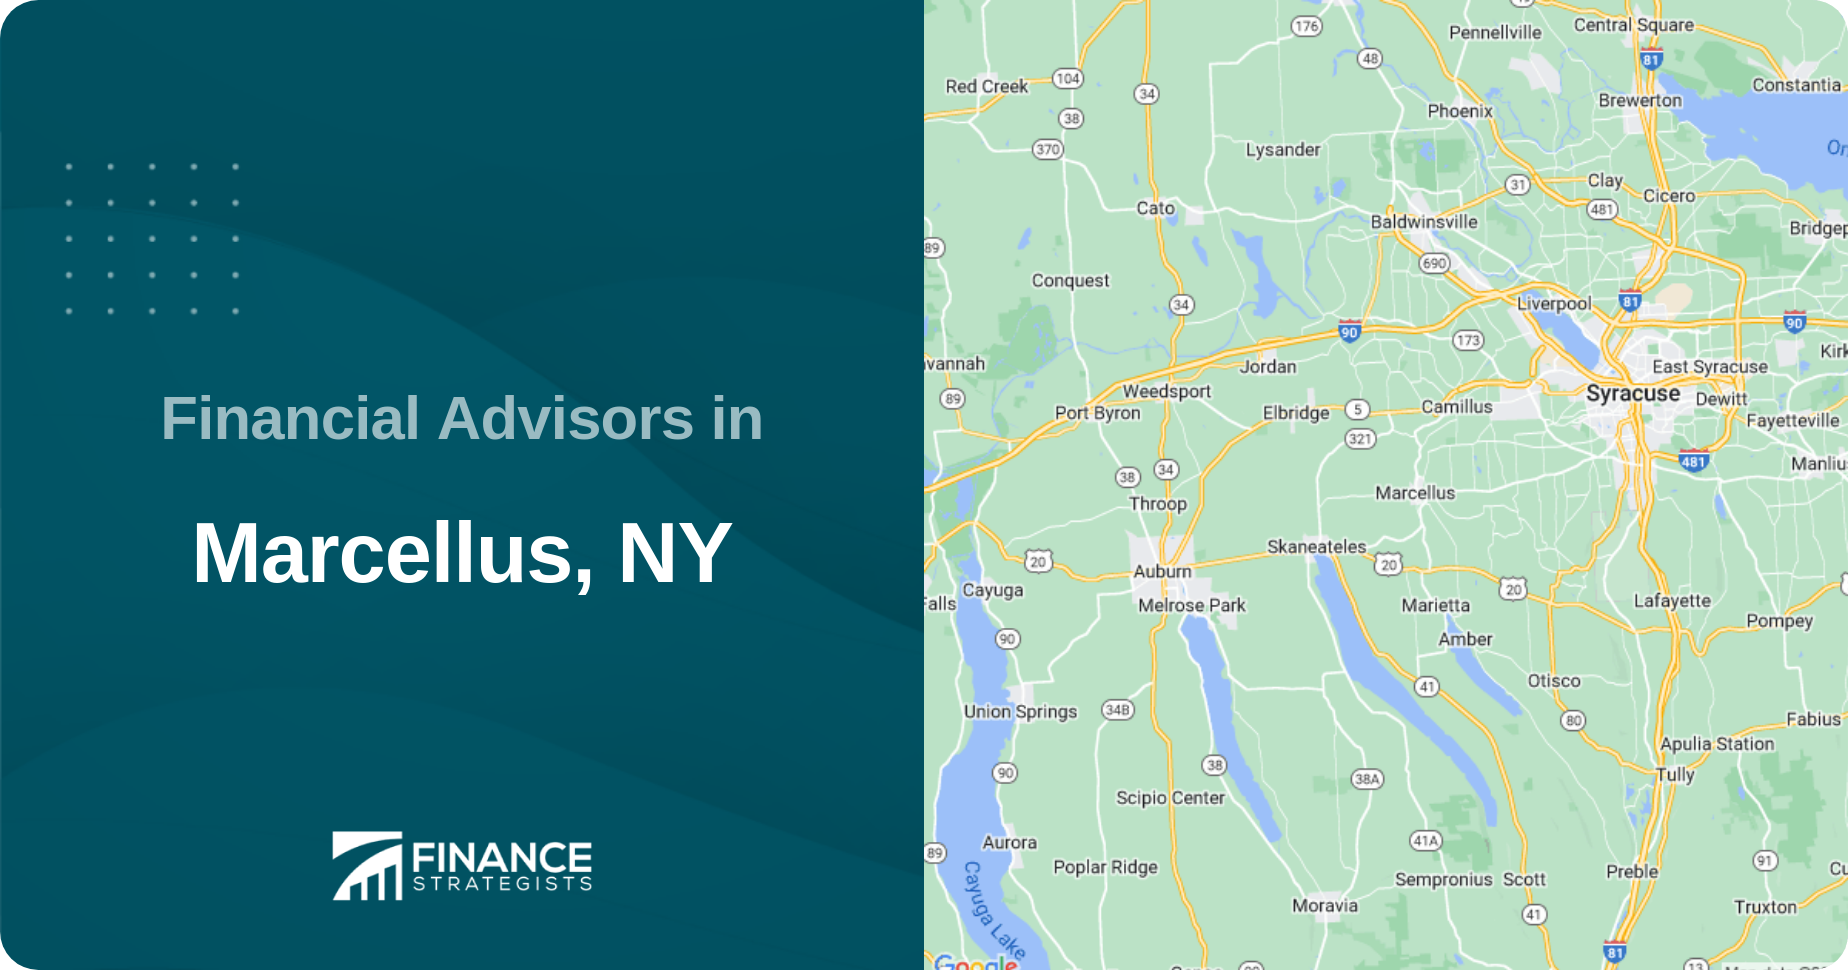 Financial Advisors in Marcellus, NY